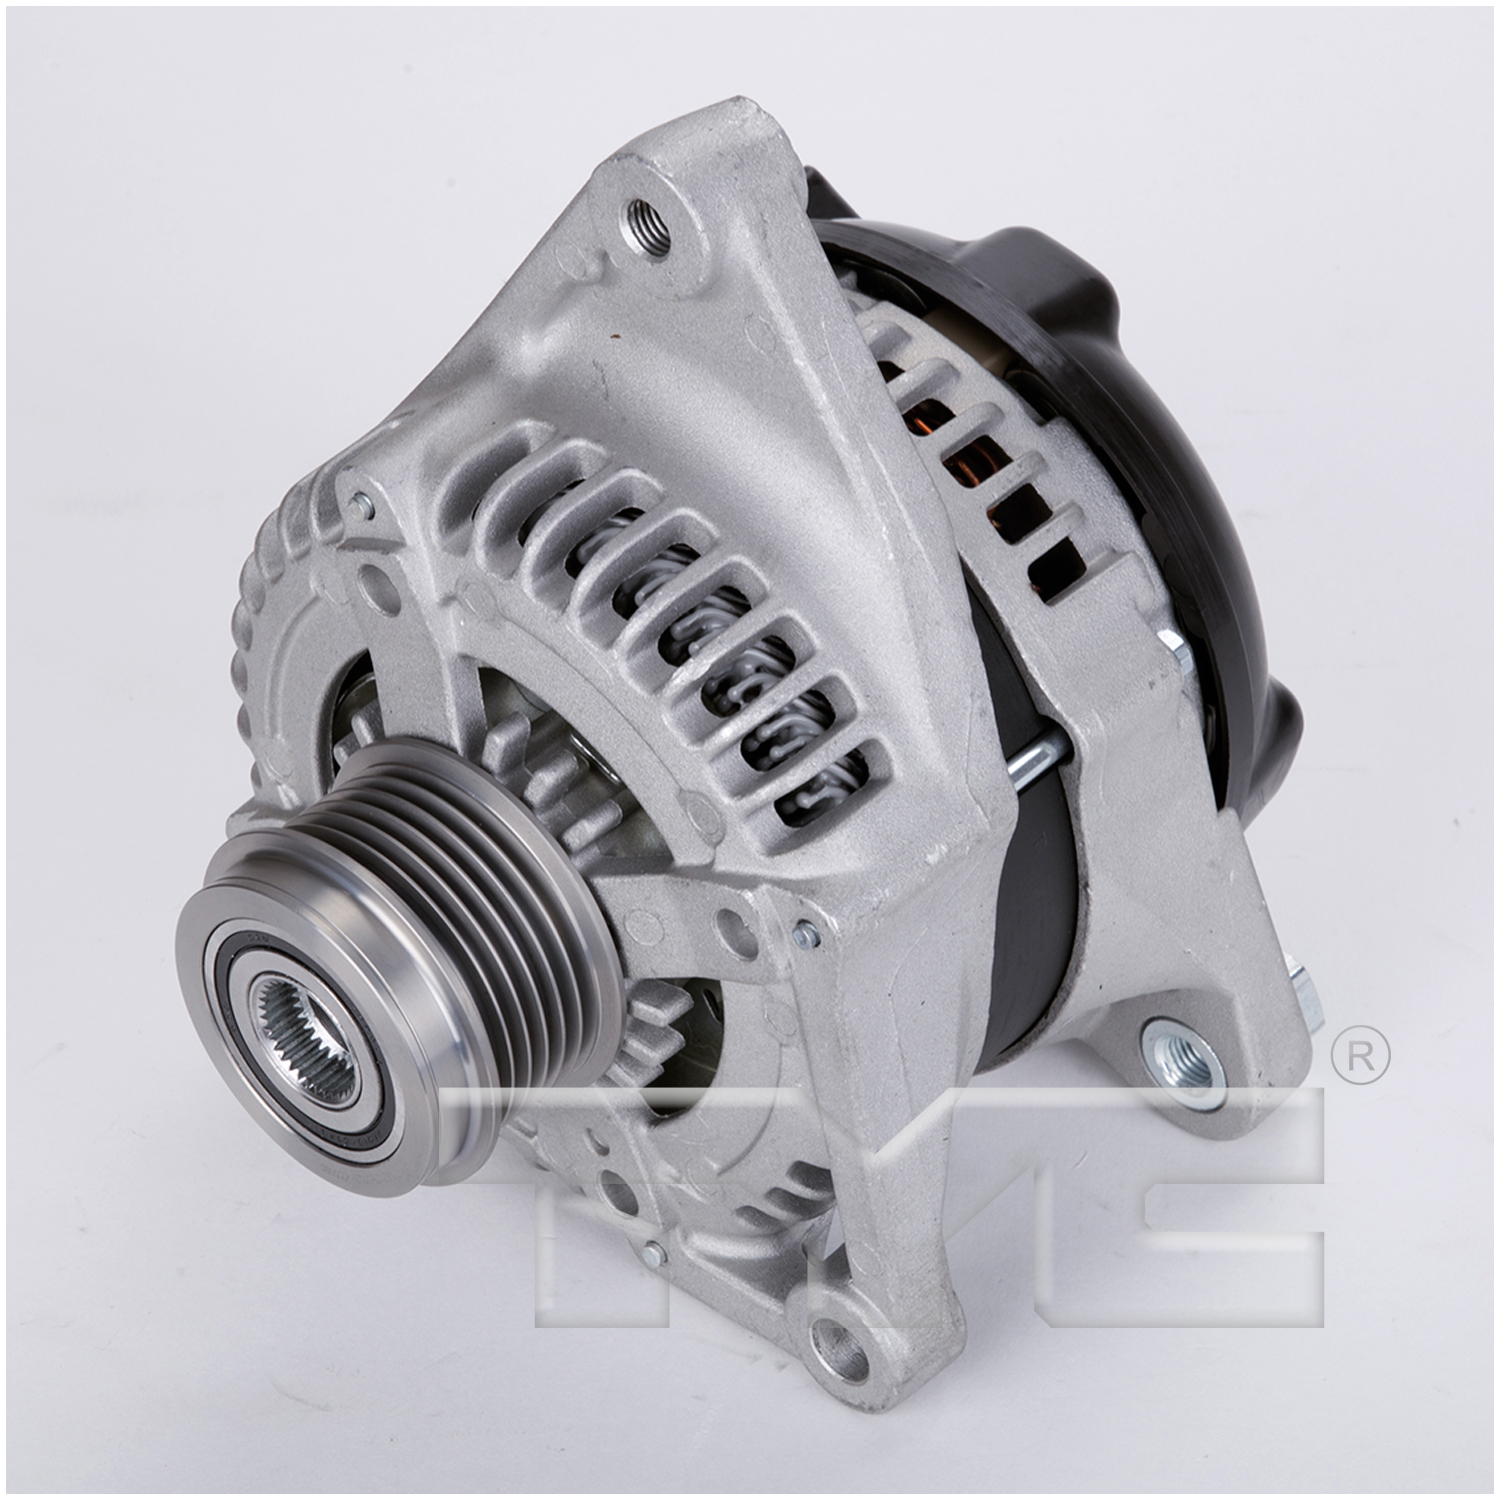 TYC-2-11402_NEW TYC ALTERNATOR FOR 12V 100AMP DENSO SC (HAIRPIN) FOR TOYOTA APPLICATIONS